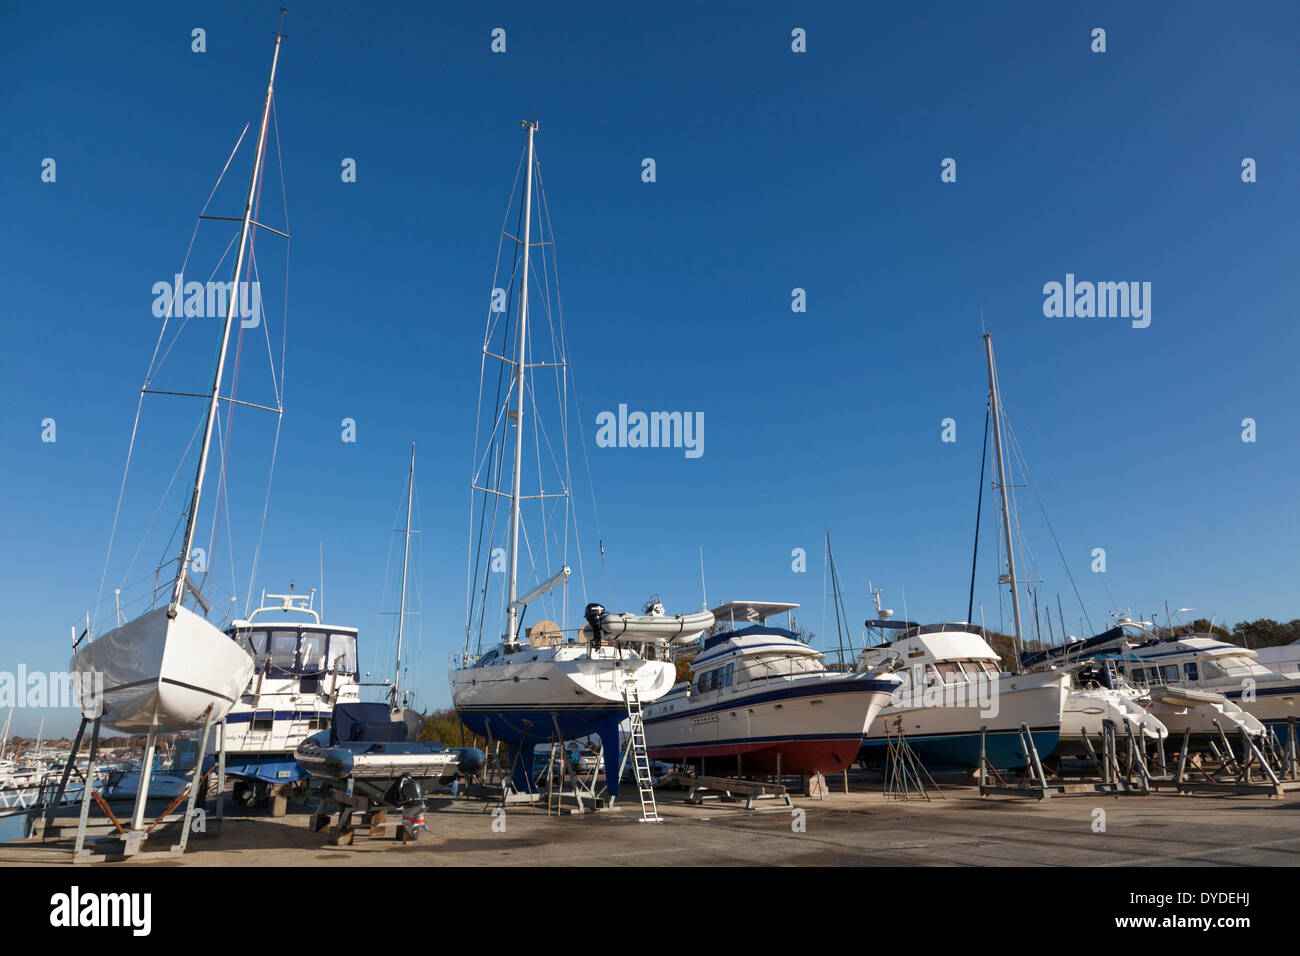 Yachts and motor crusiers on props in a boatyard out of the water for the winter. Stock Photo